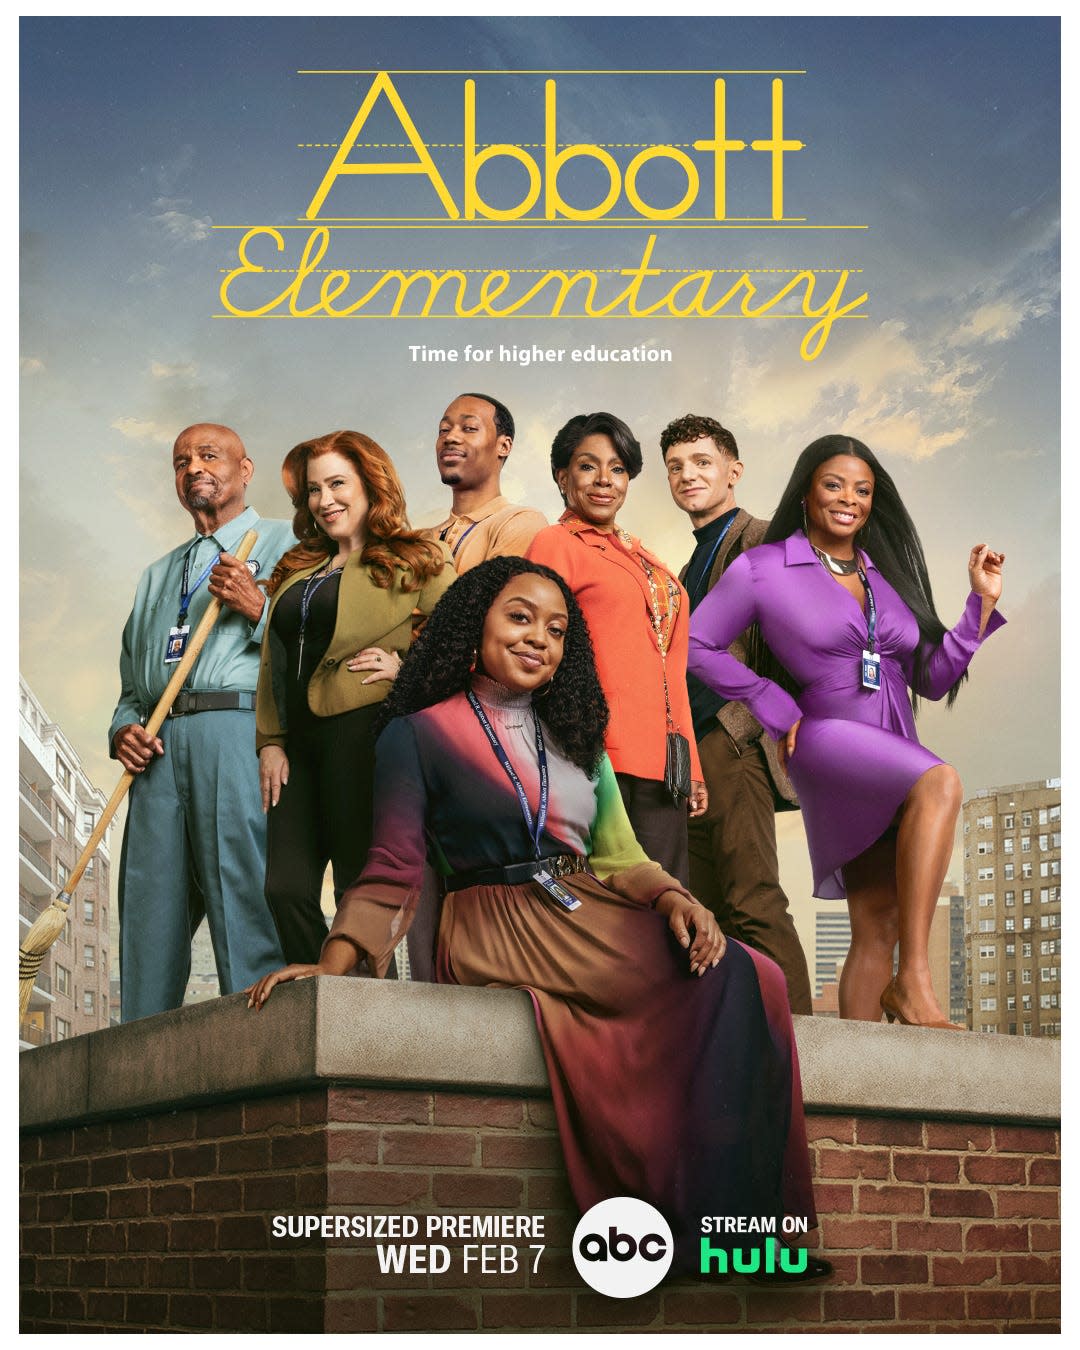 The third season of ABC's award-winning workplace comedy is set to premiere Wednesday, Feb. 7 at 9 p.m. EST/8 p.m. CST.